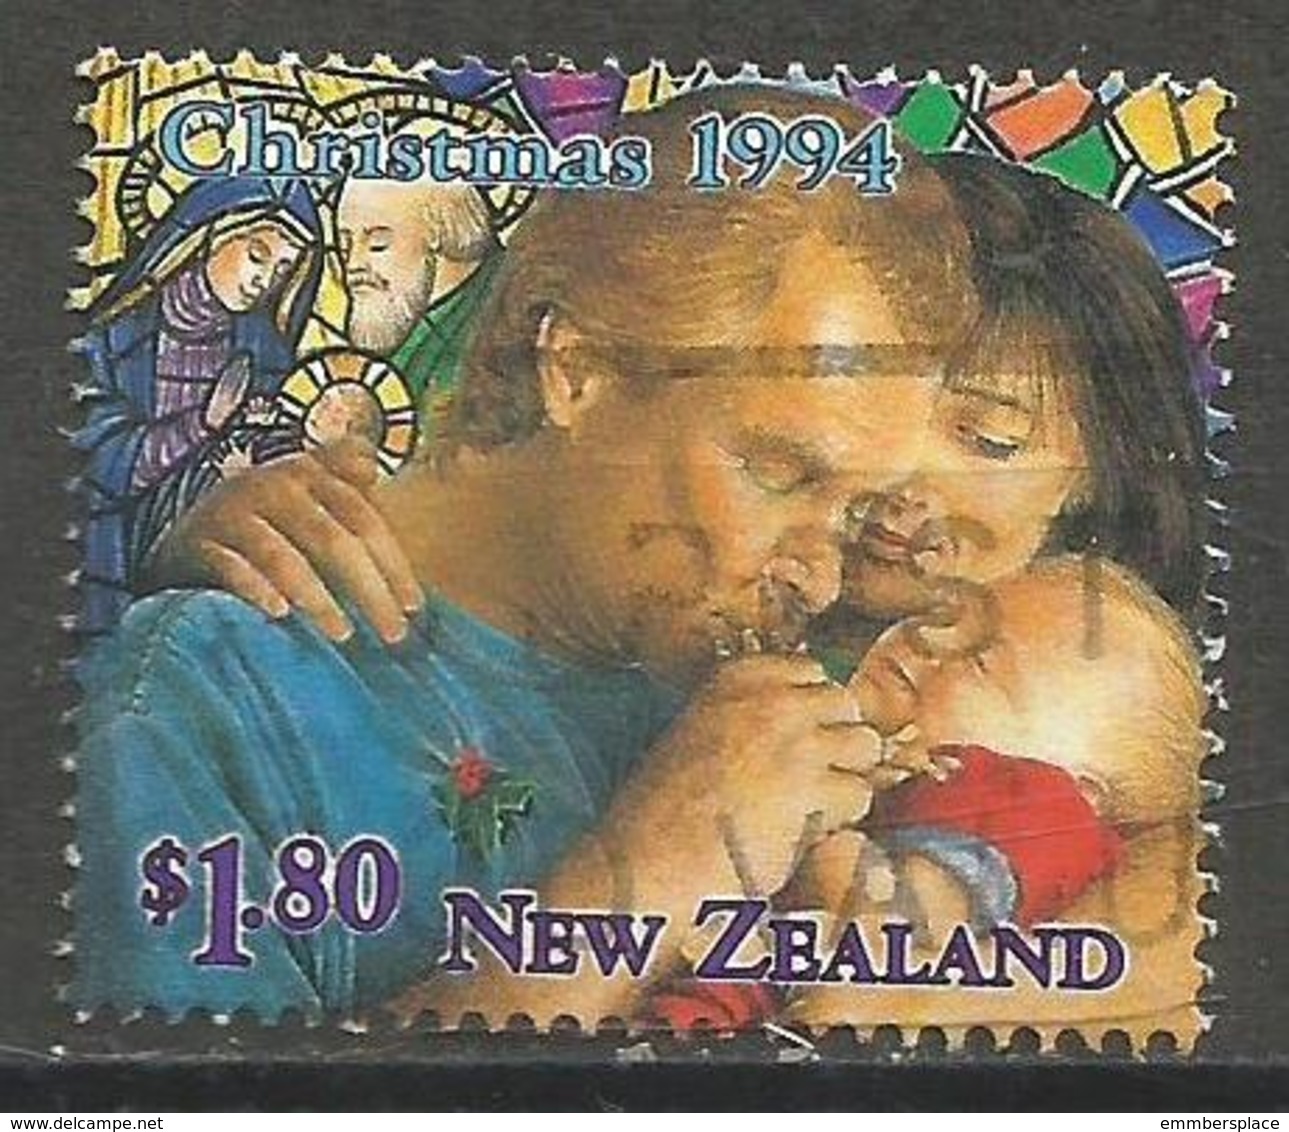 New Zealand - 1994 Christmas $1.80 Used  SG 1835 - Used Stamps